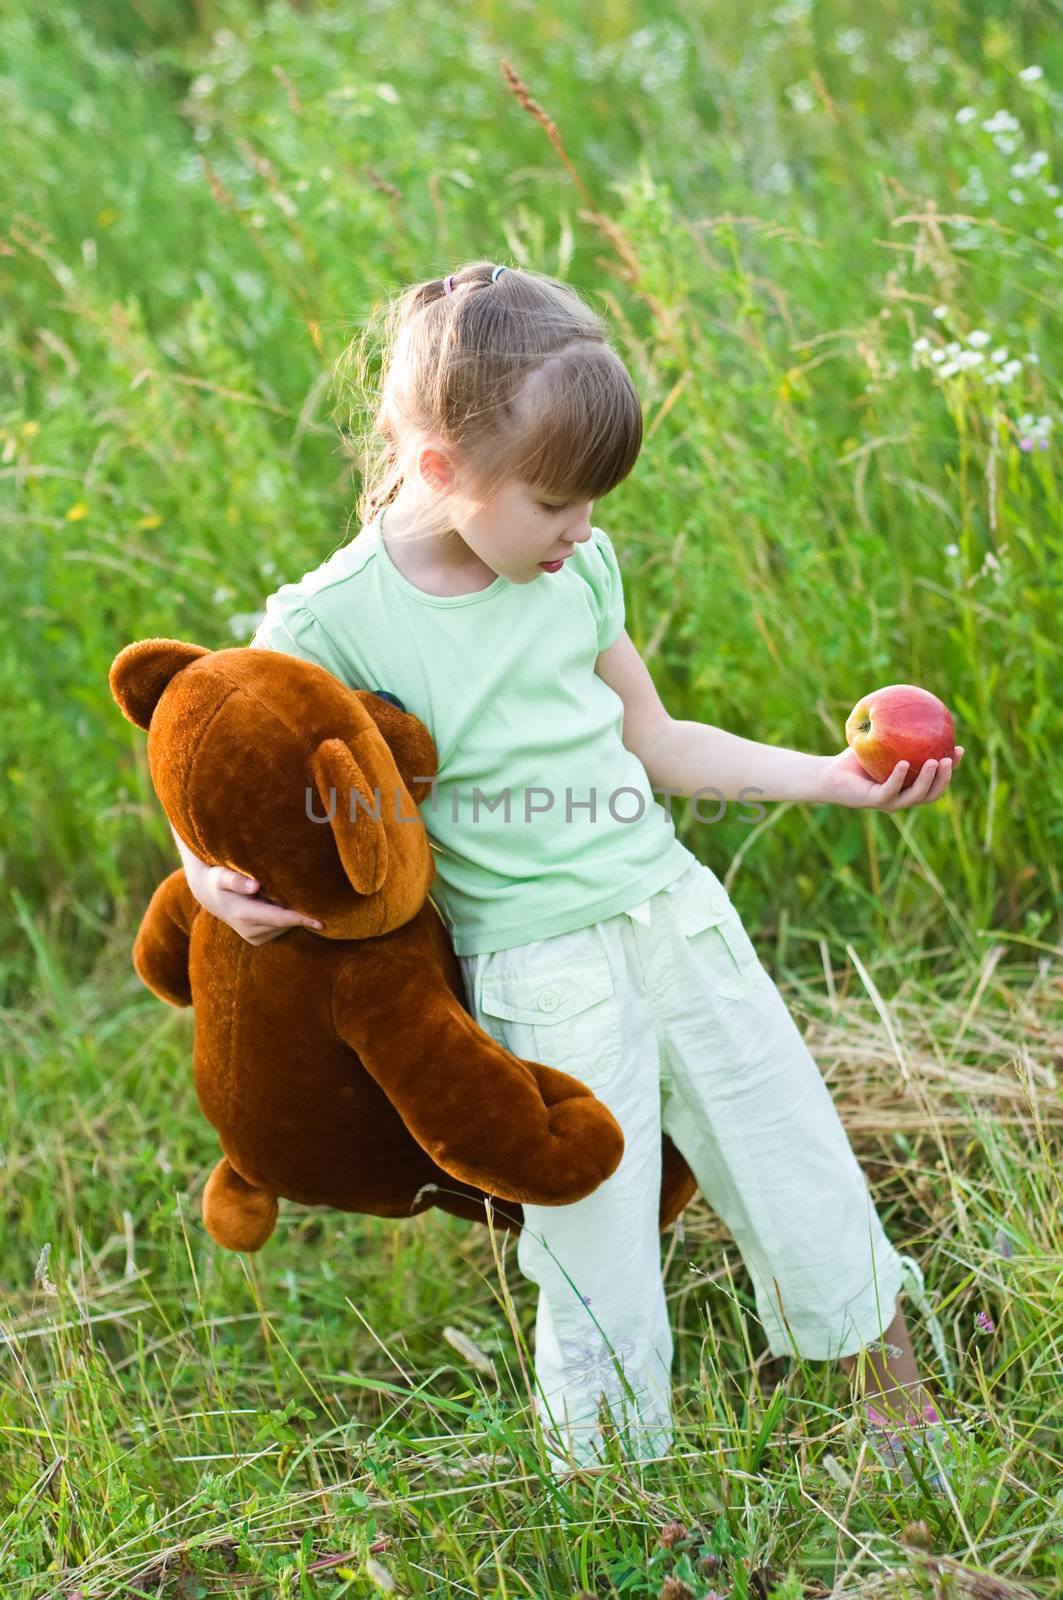 girl with apple and teddy bear in a summer meadow.